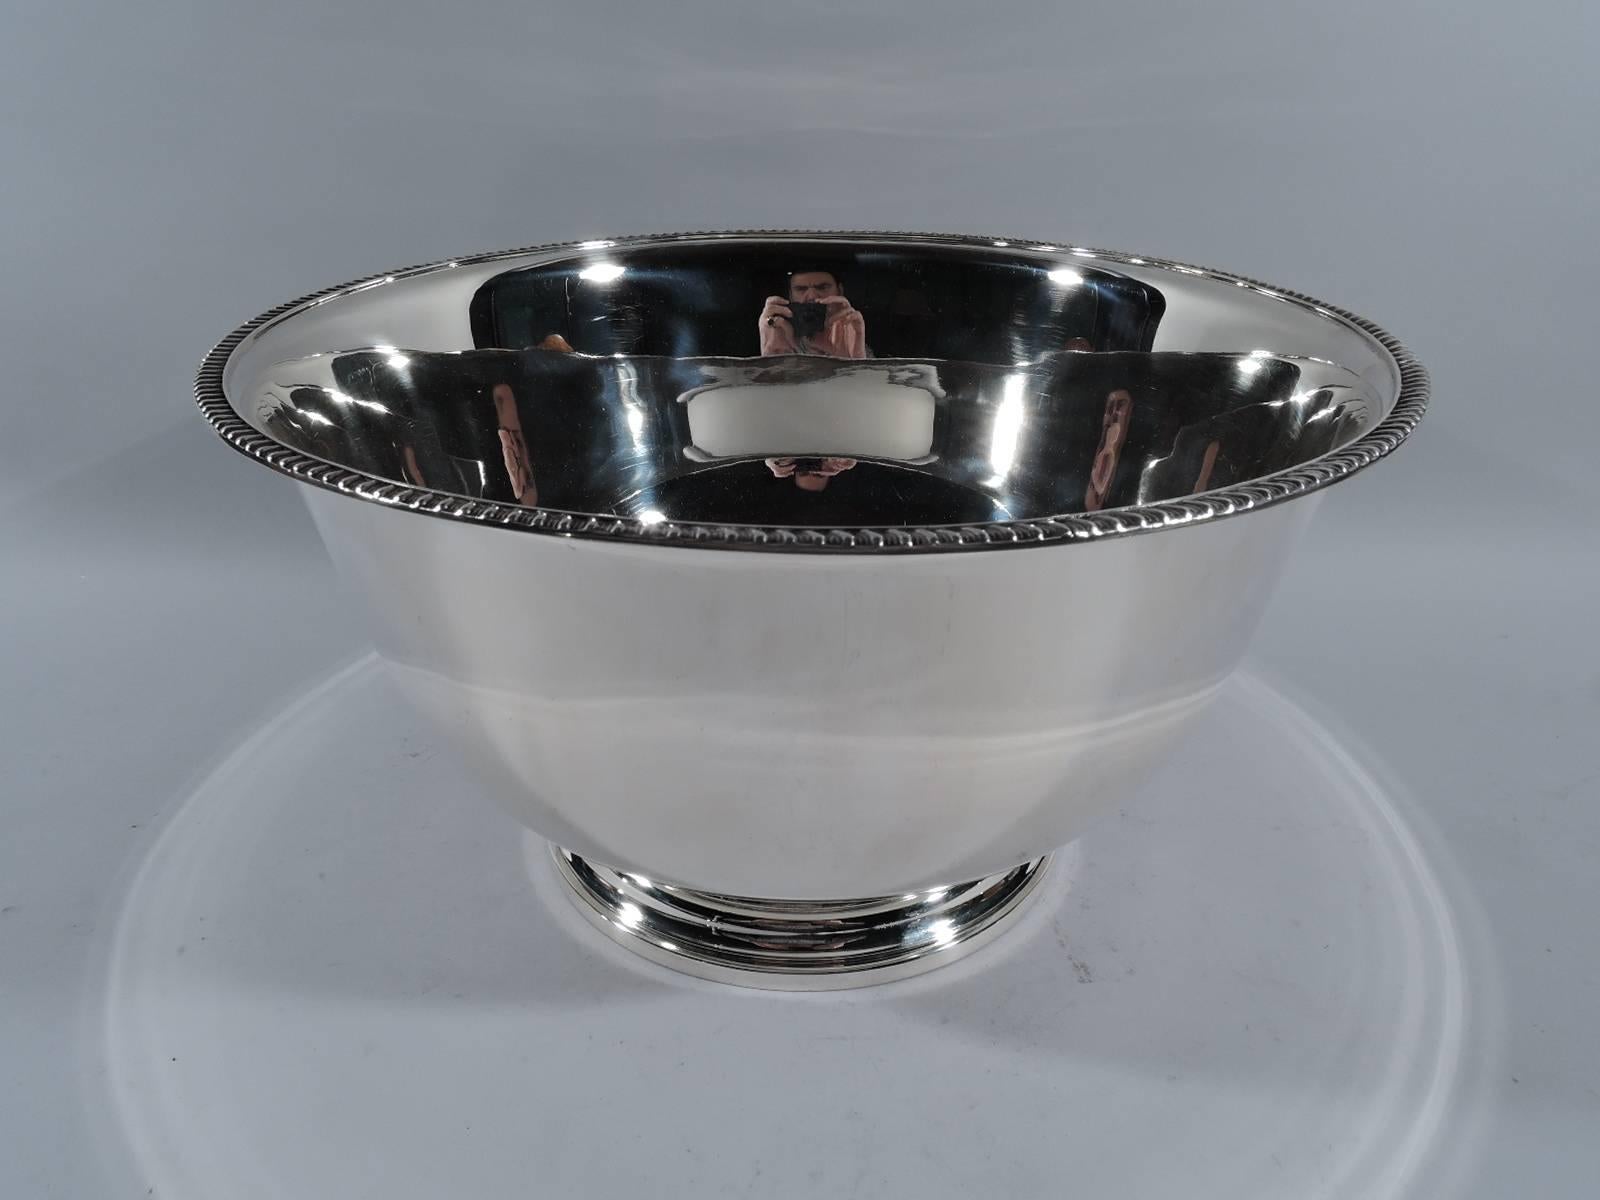 Large sterling silver centerpiece bowl. Retailed by Georg Jensen Inc. USA in New York, ca 1950. Curved sides with gadrooned rim and stepped foot. The traditional form in large scale. A great trophy or presentation piece with lots and lots of room